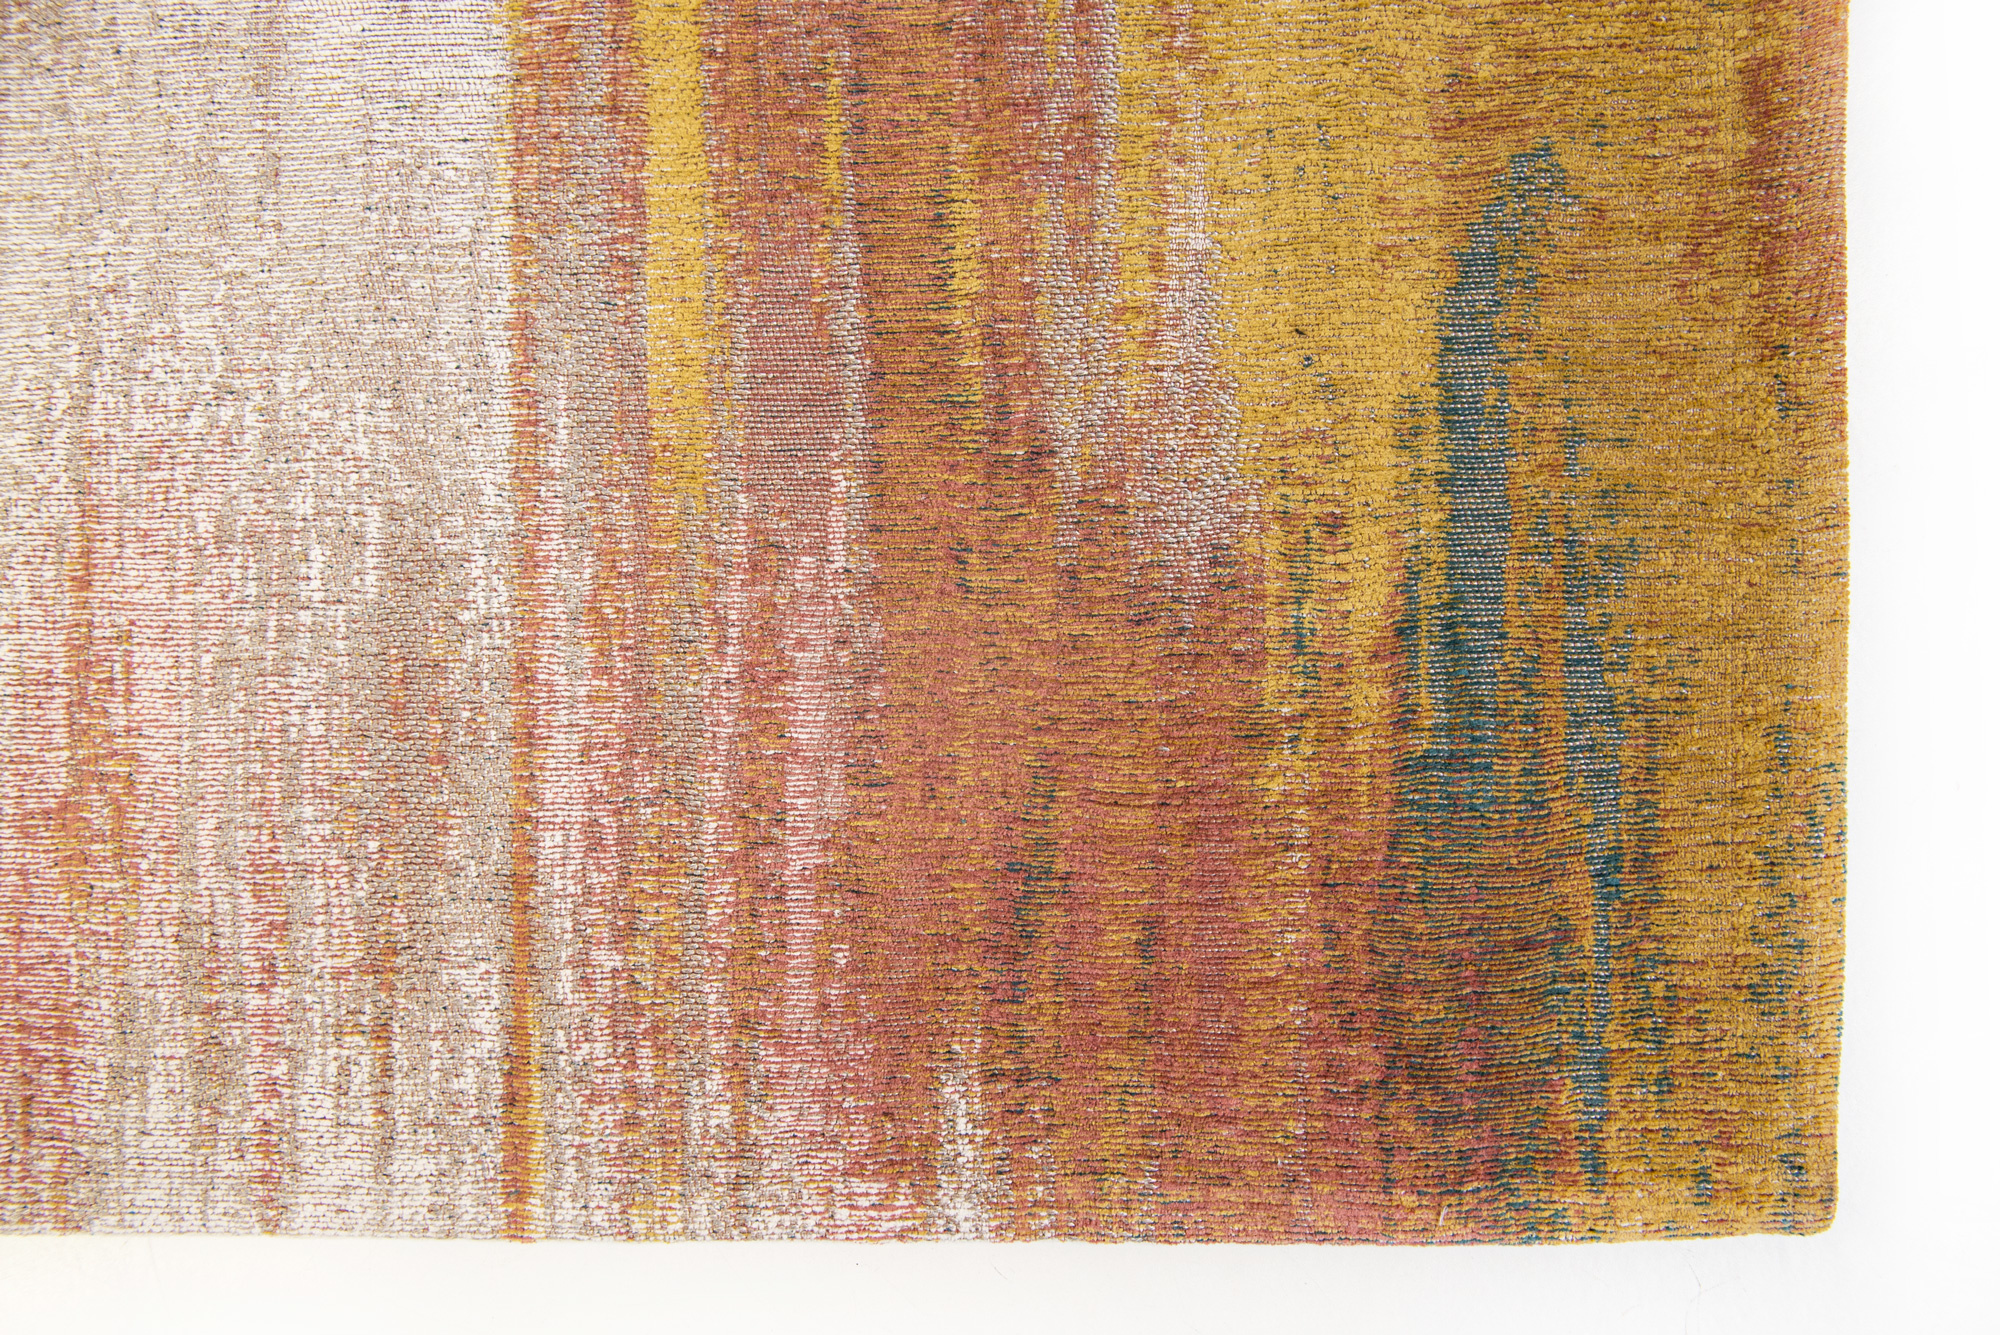 Abstract Flatwoven Mix Rug ☞ Size: 9' 2" x 12' (280 x 360 cm)